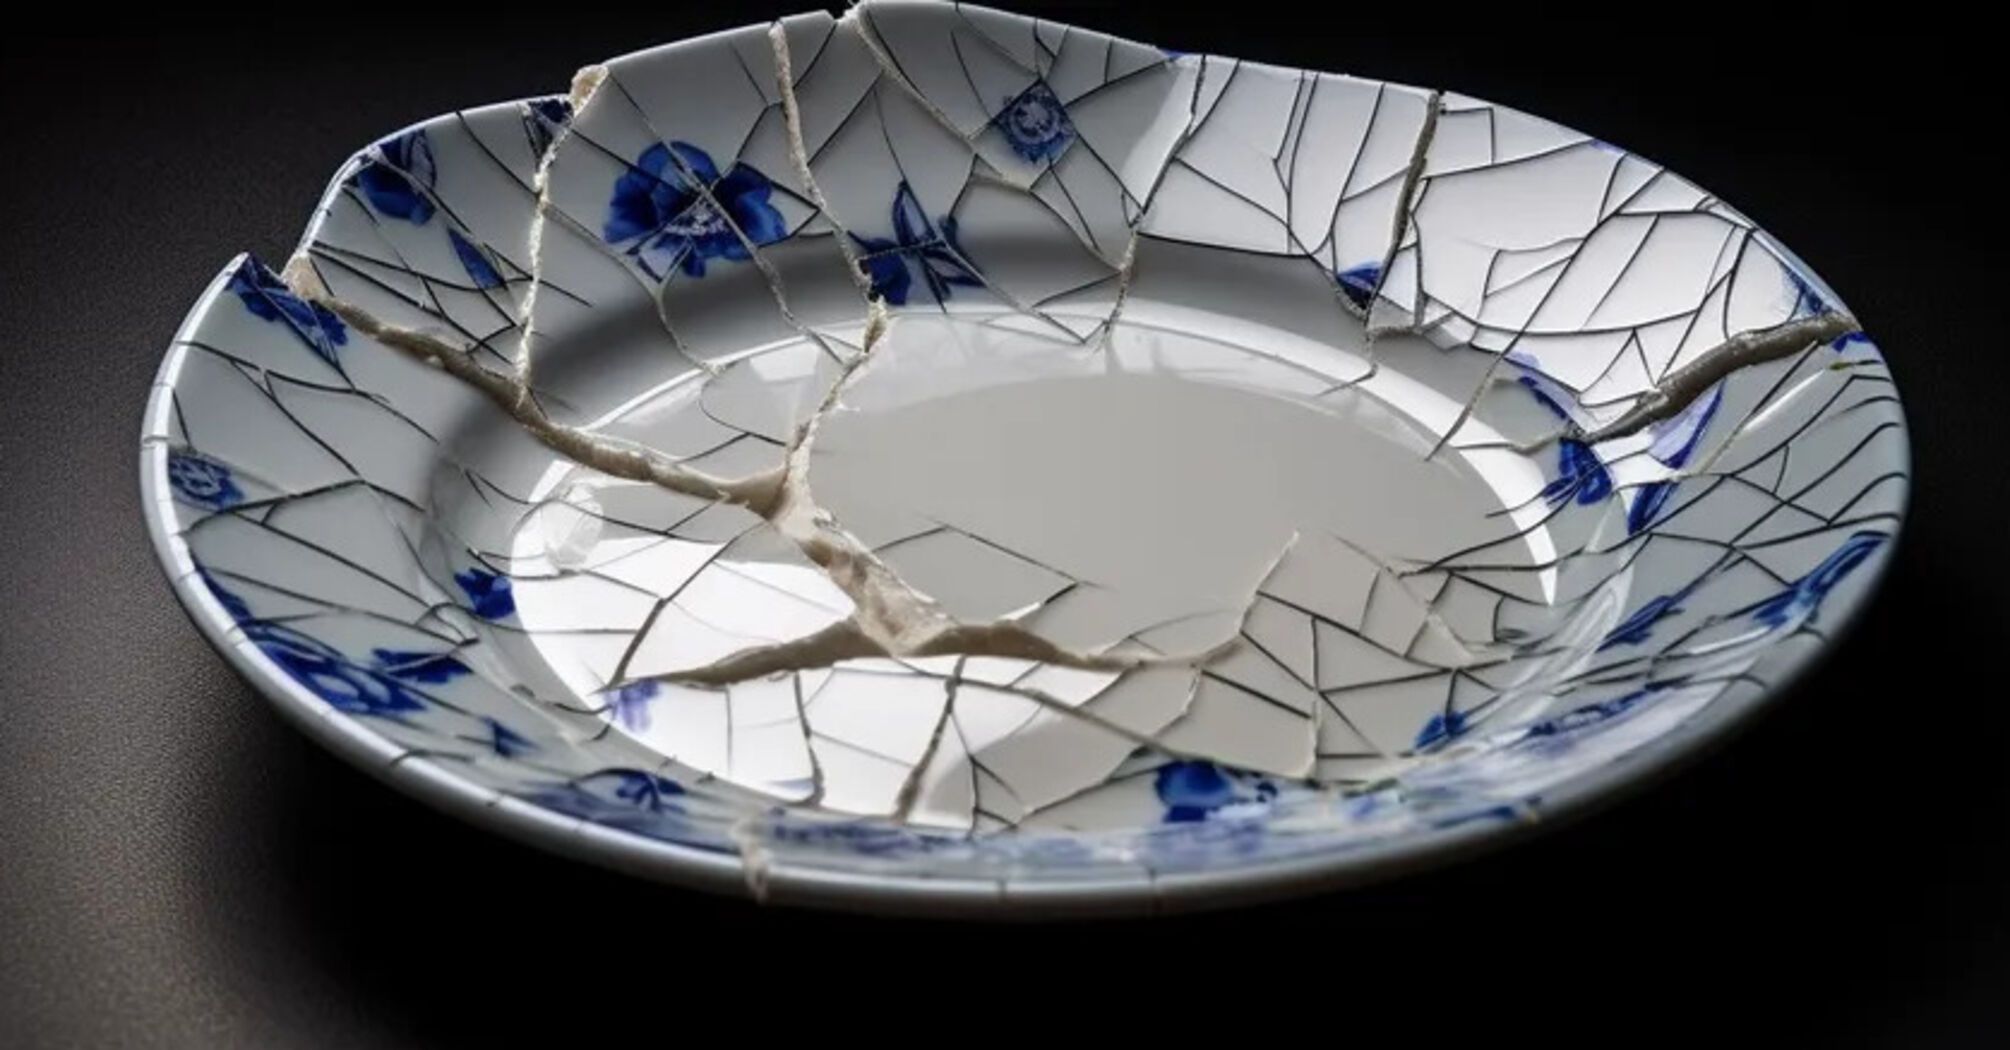 What does a broken plate mean